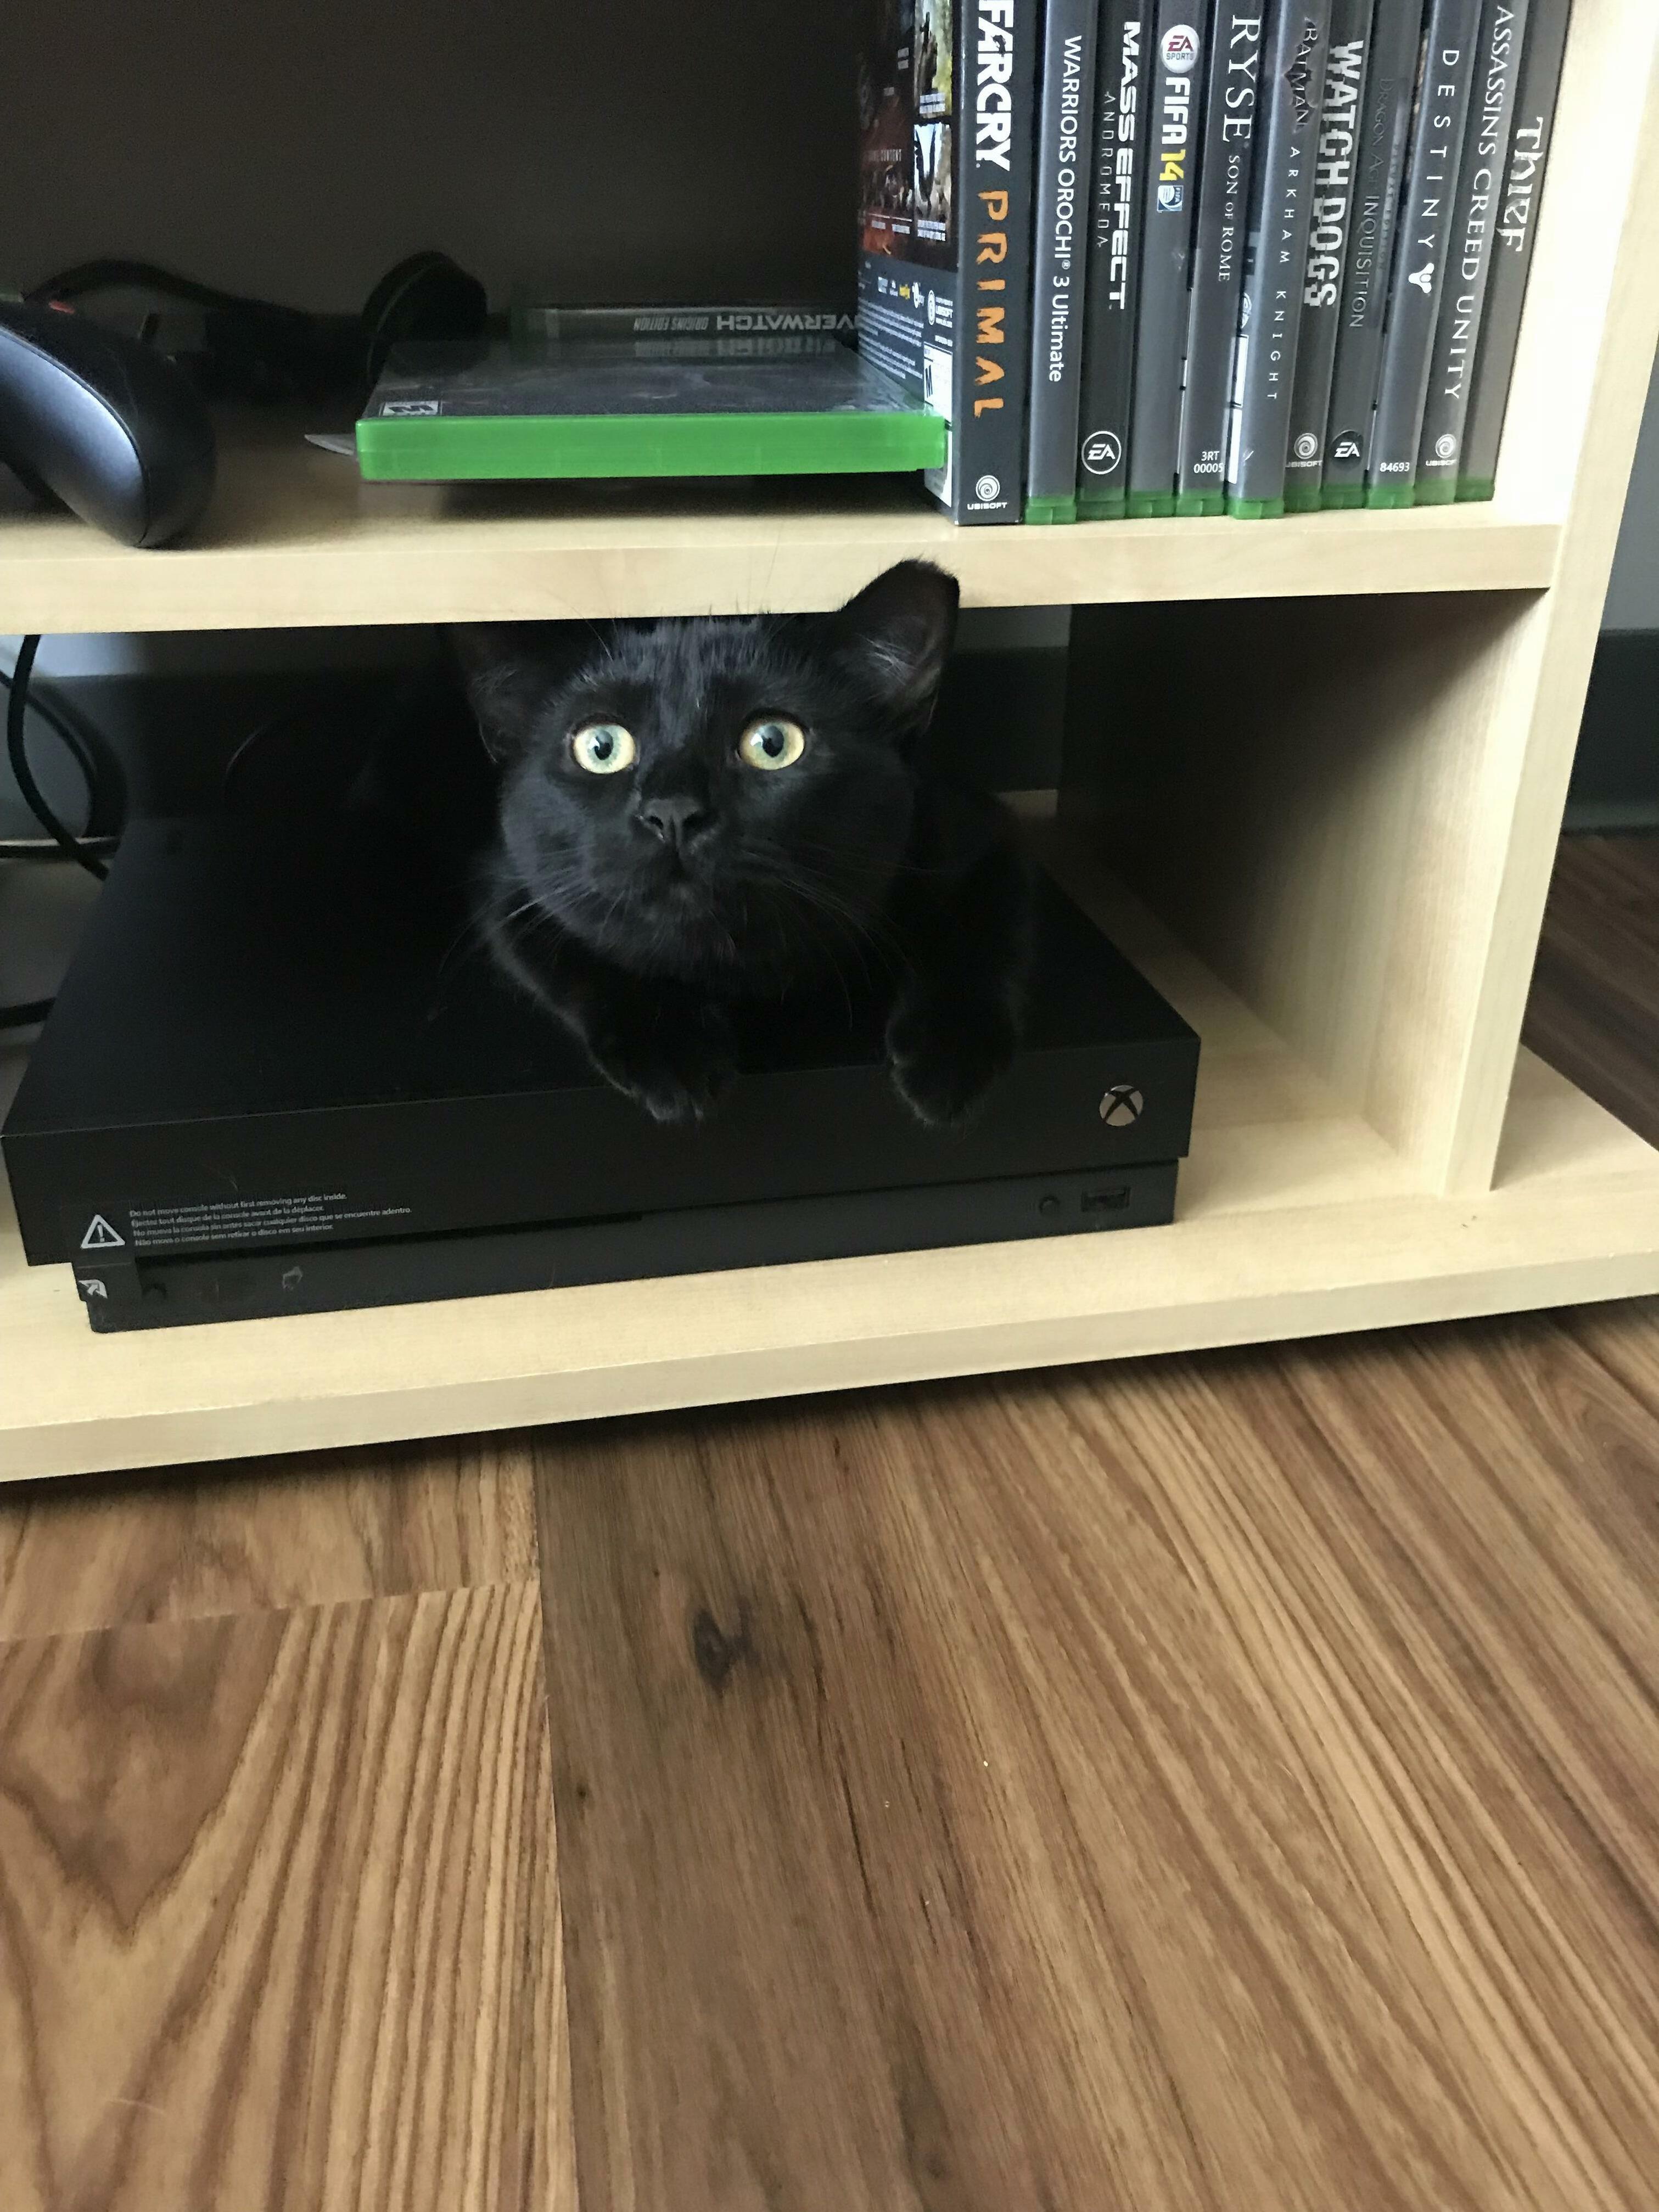 Mei will be one in october. she has already claimed my xbox one as her own.